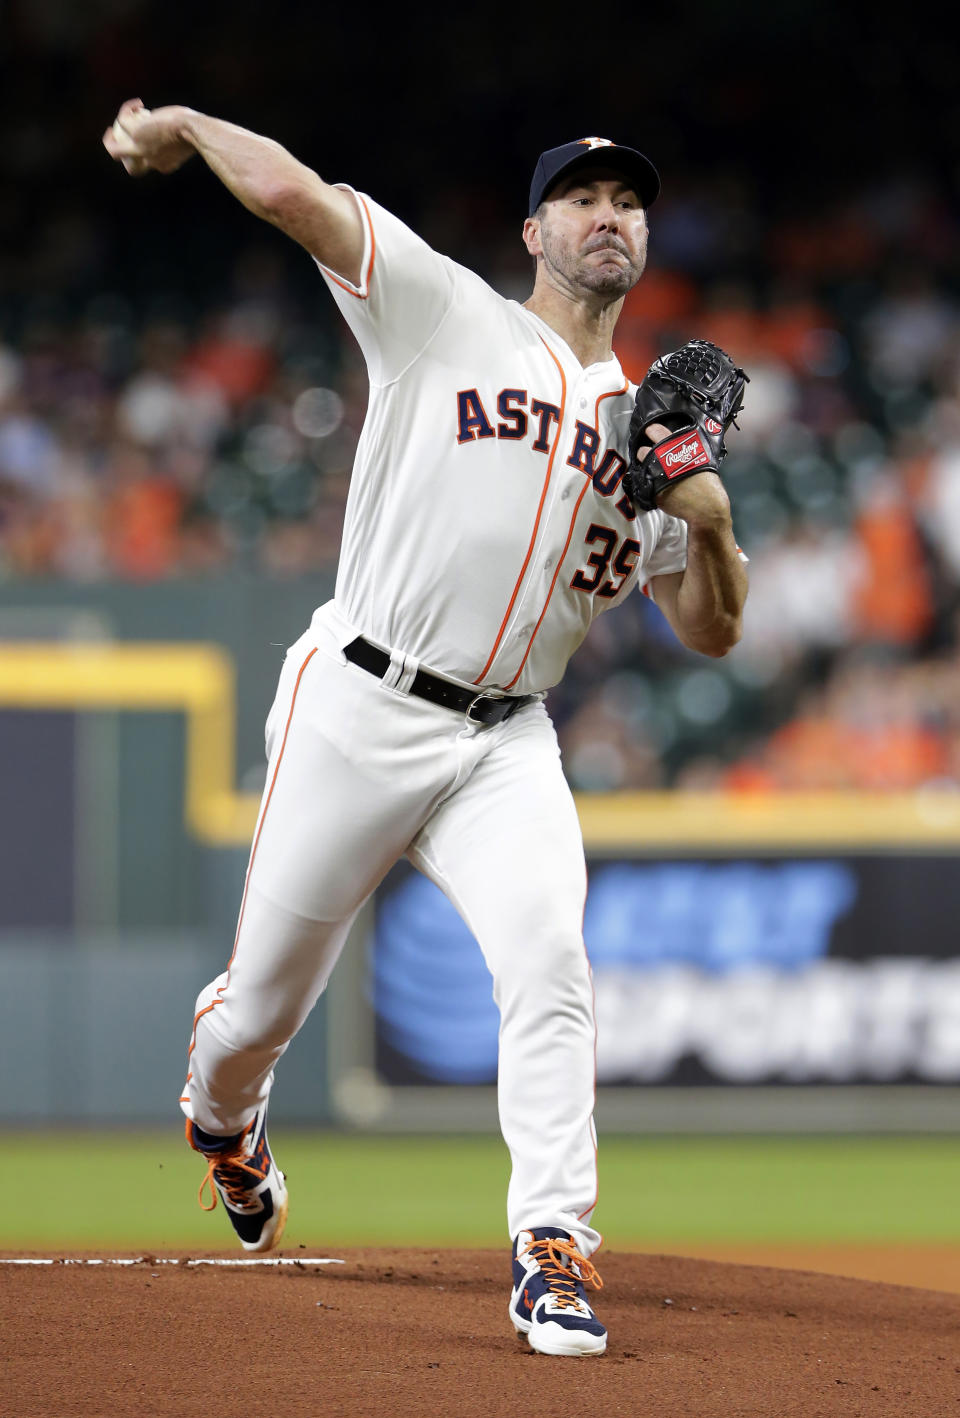 Houston Astros starting pitcher Justin Verlander (35) throws against the Tampa Bay Rays during the first inning of a baseball game Tuesday, Aug. 27, 2019, in Houston. (AP Photo/Michael Wyke)